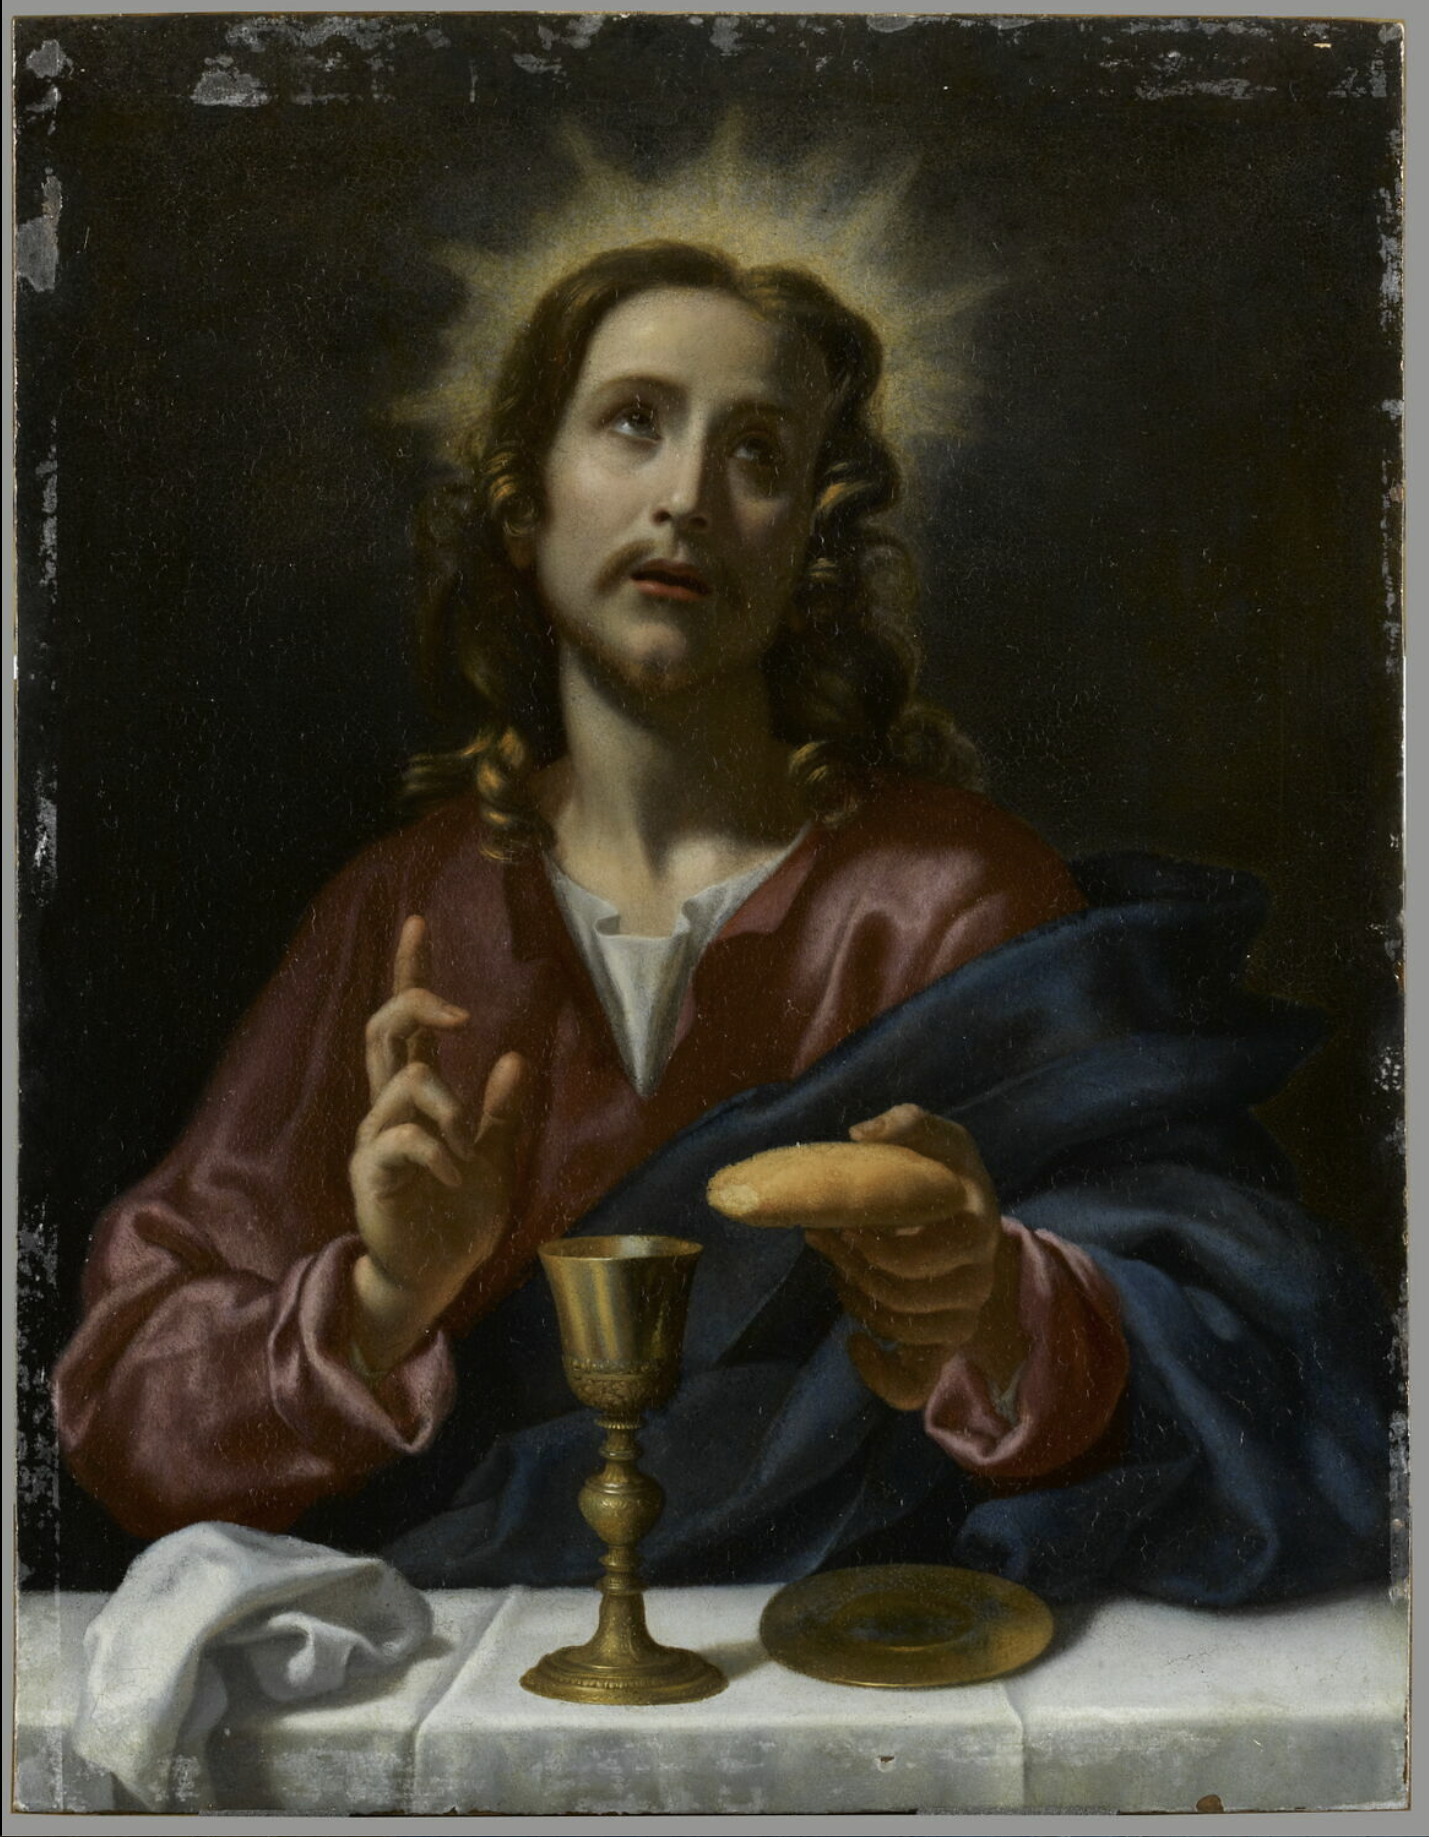 An image of Christ seated at a table with a gold goblet and a small gold plate in front of him. He is holding a piece of bread in his left hand, while his right hand is raised in blessing. He looks up towards the sky, while a halo of golden light frames his head.